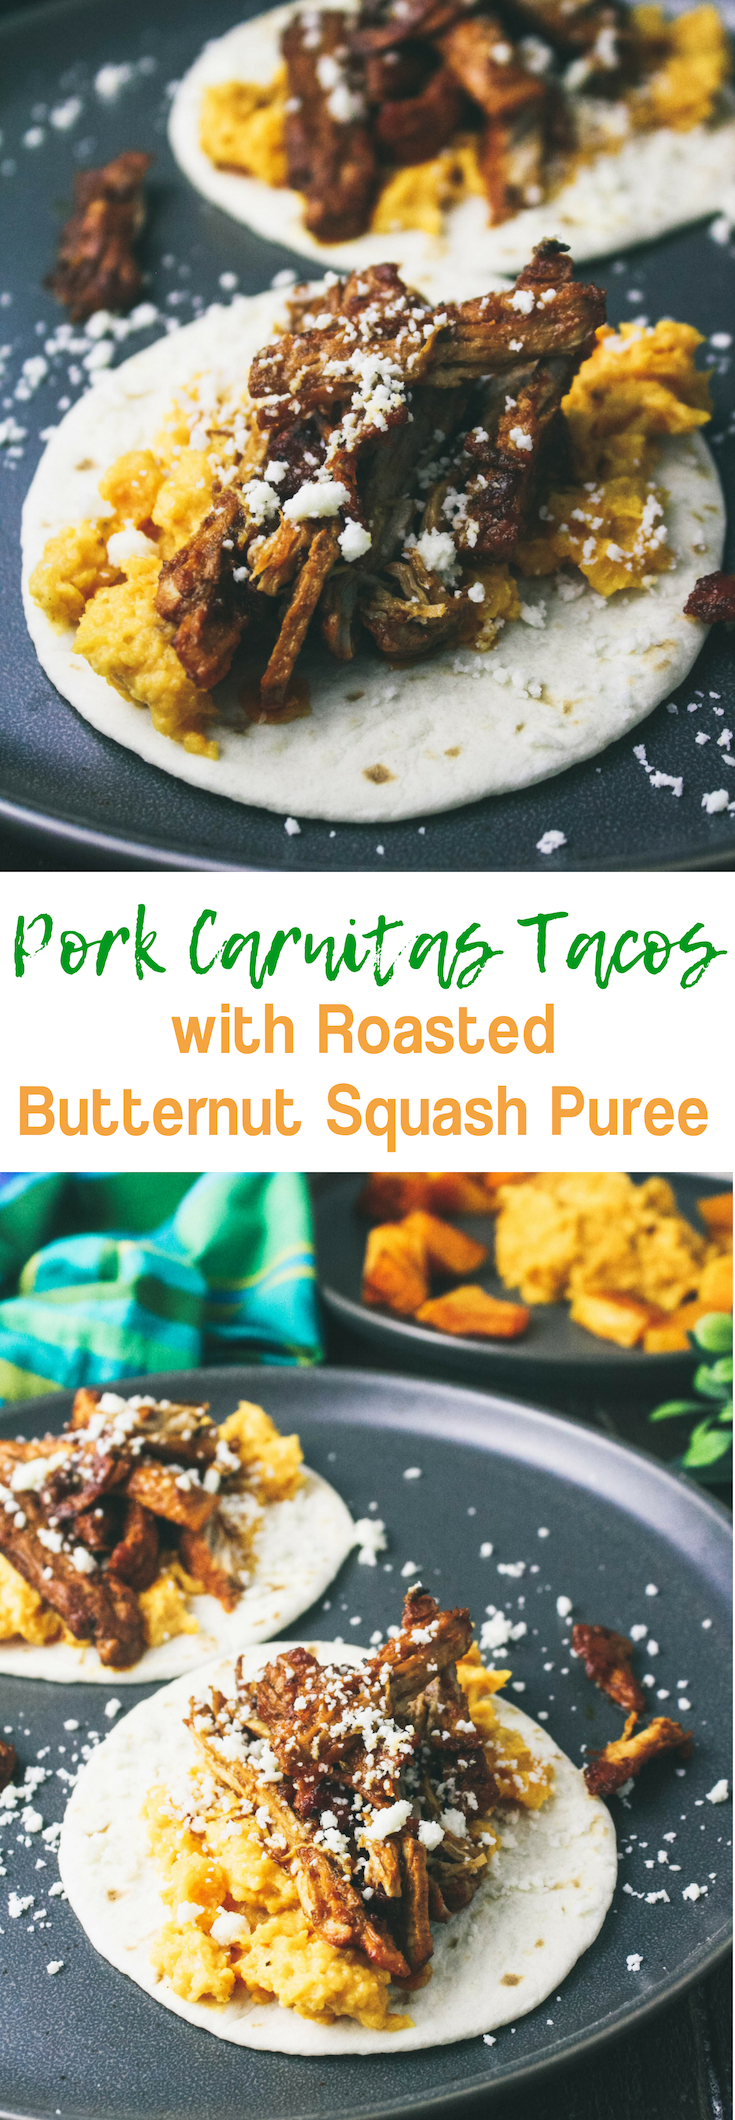 Pork Carnitas Tacos with Butternut Squash Puree is a wonderful dish to serve at mealtime. These Pork Carnitas Tacos with Butternut Squash Puree are so tasty for dinner!